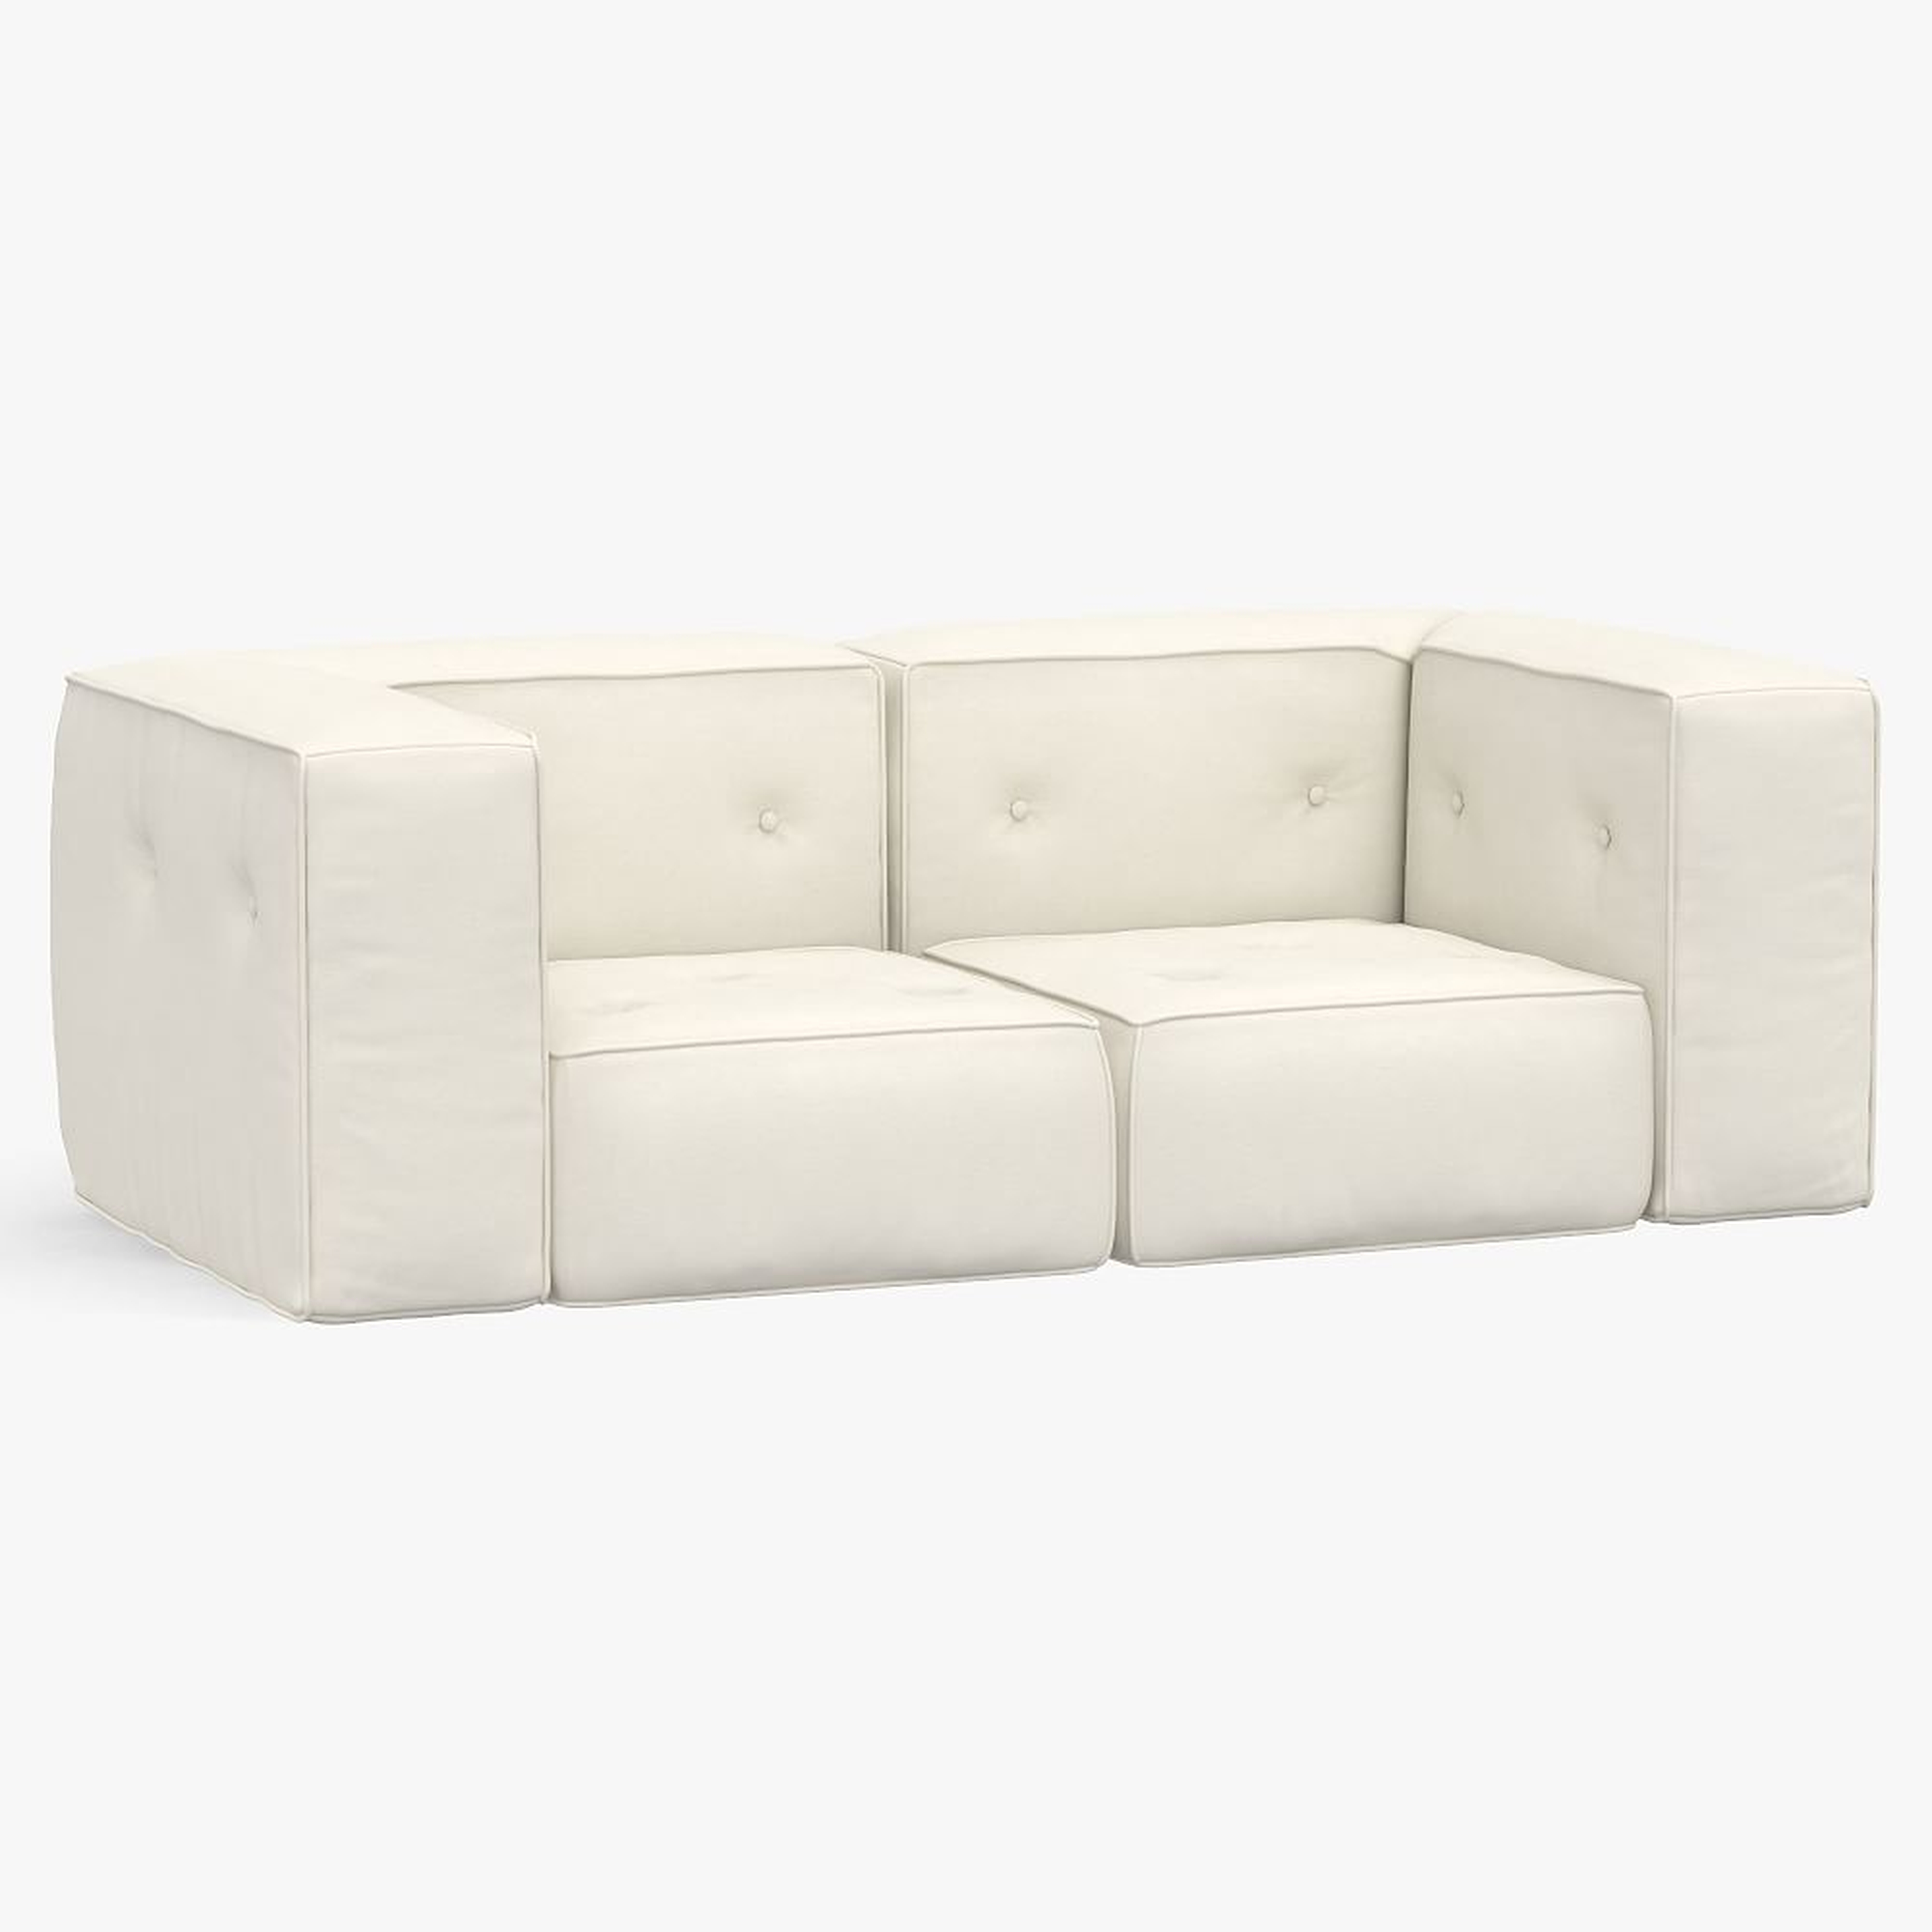 Cushy Piped TrimLoveseat Set. Recycled Chenille Washed Ivory, QS In-home - Pottery Barn Teen